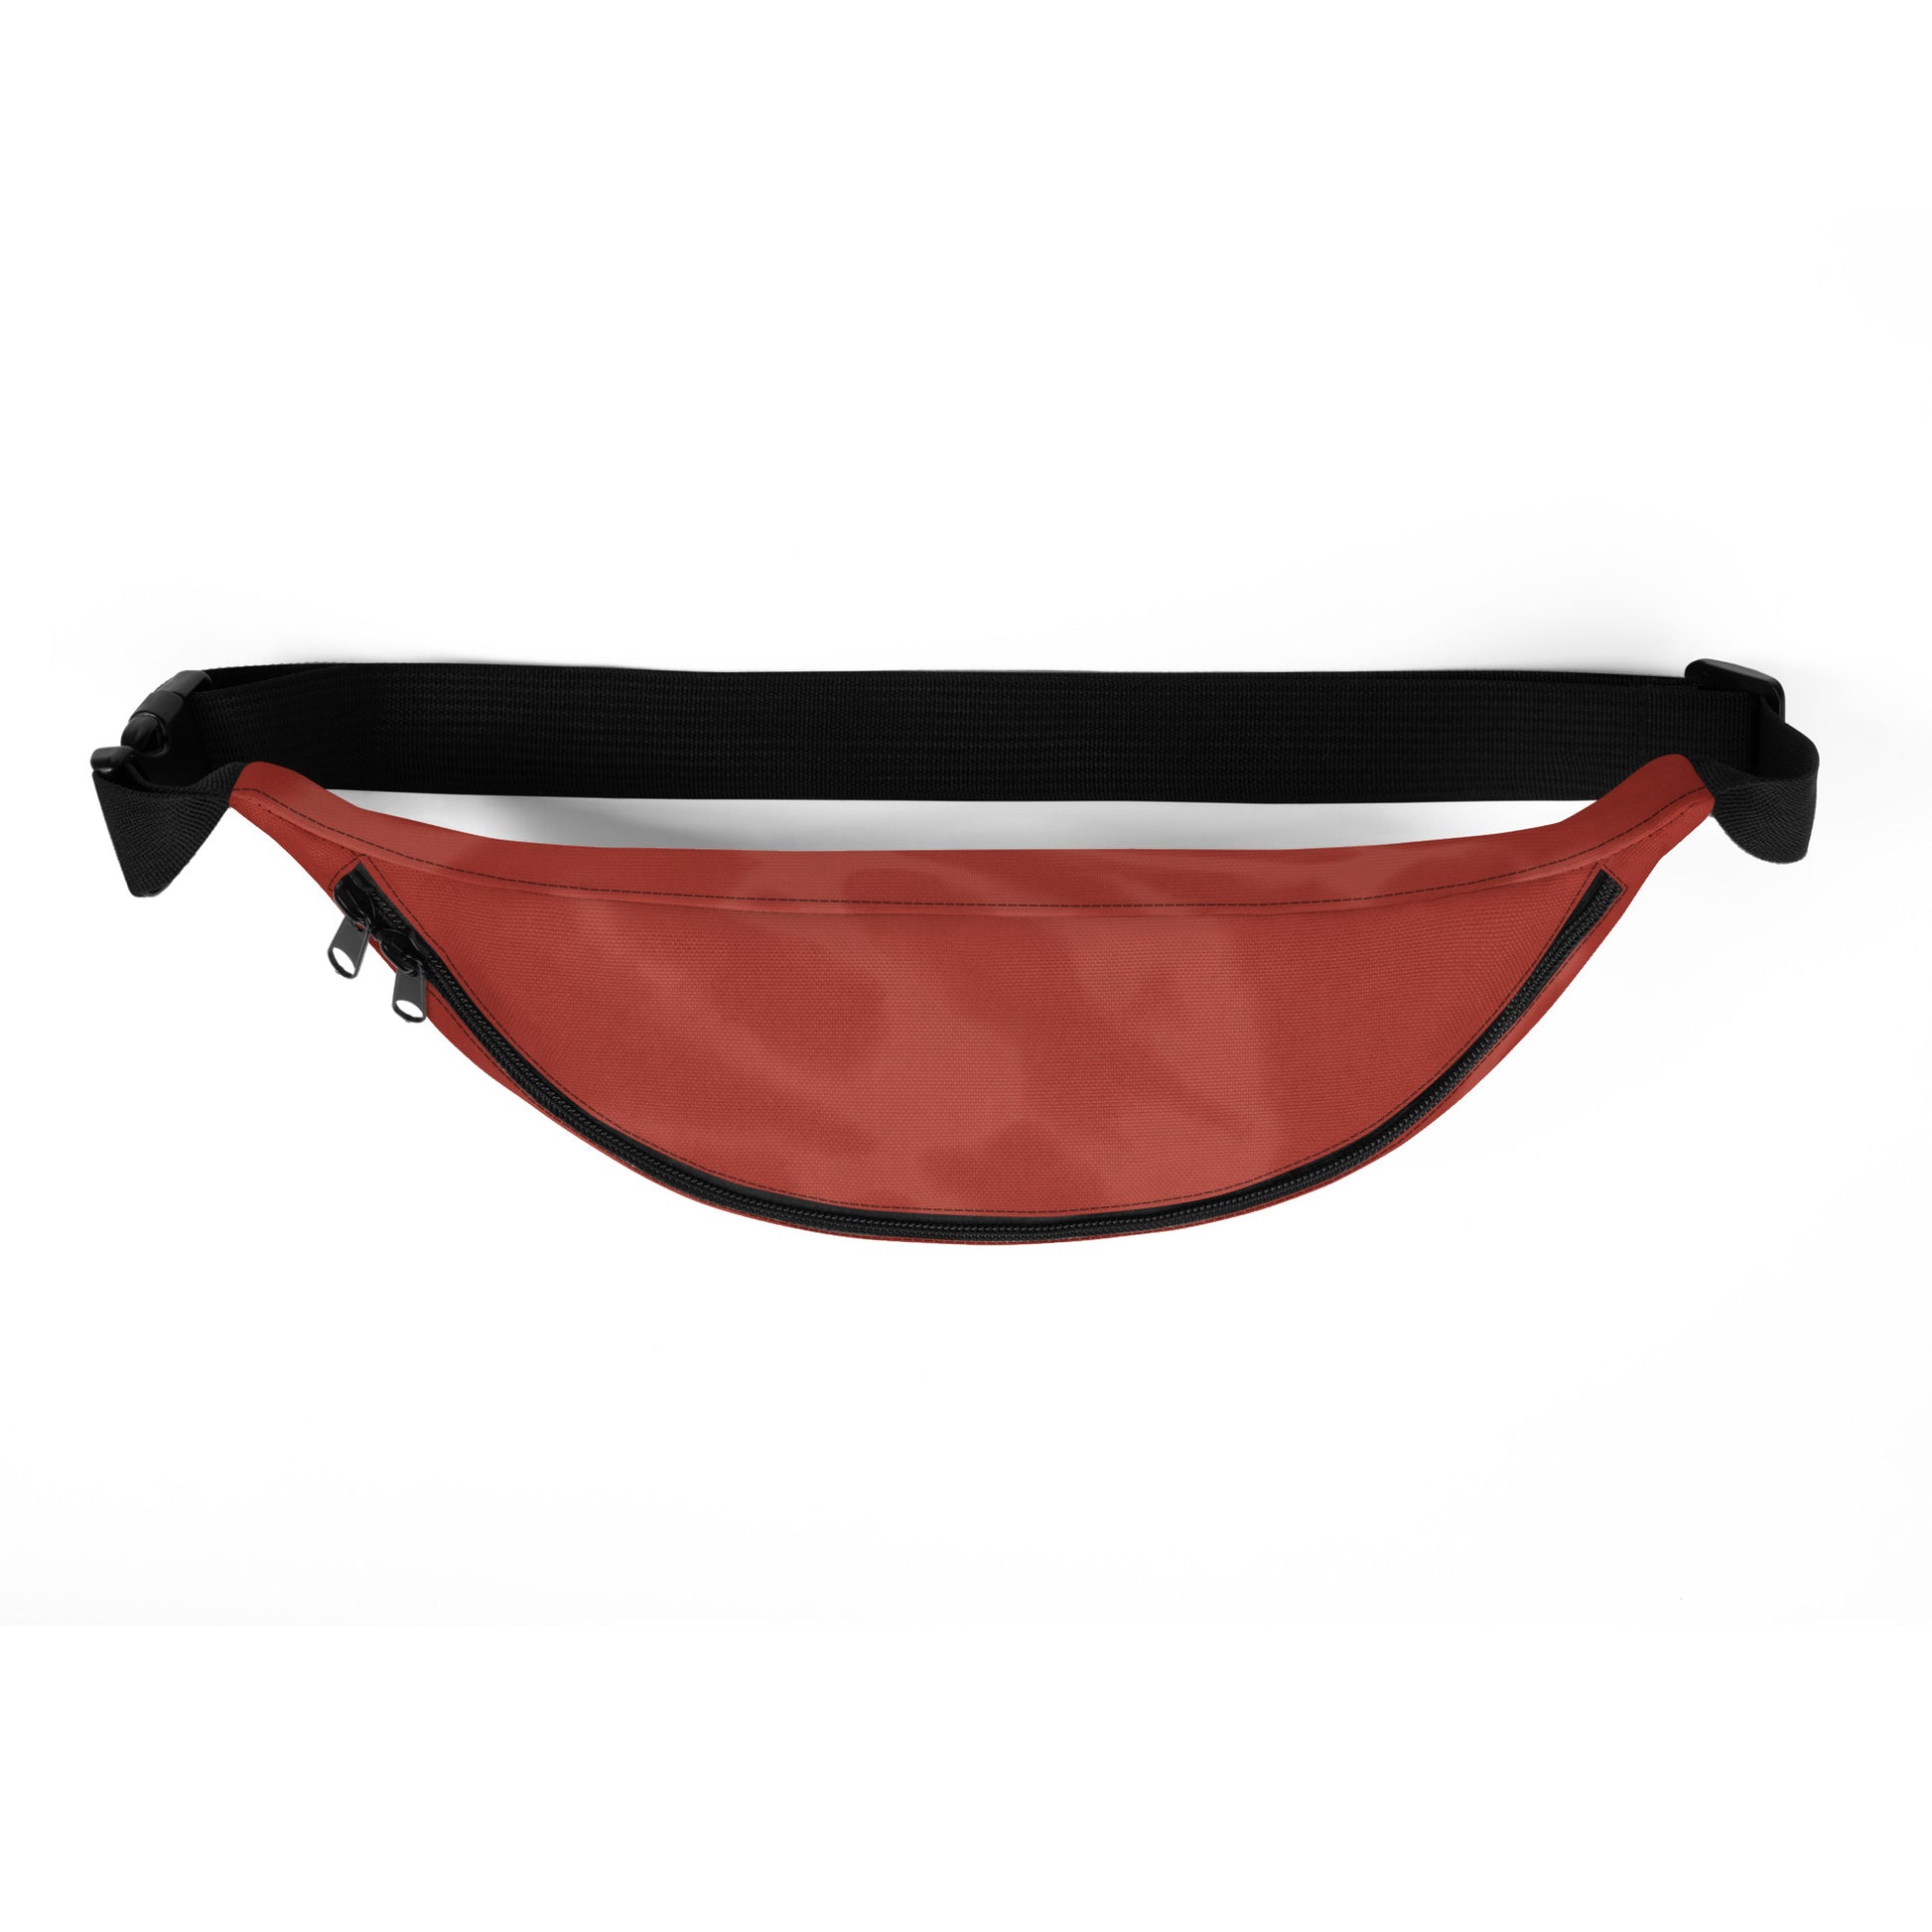 Travel Gift Fanny Pack - Red Tie-Dye • YQM Moncton • YHM Designs - Image 08